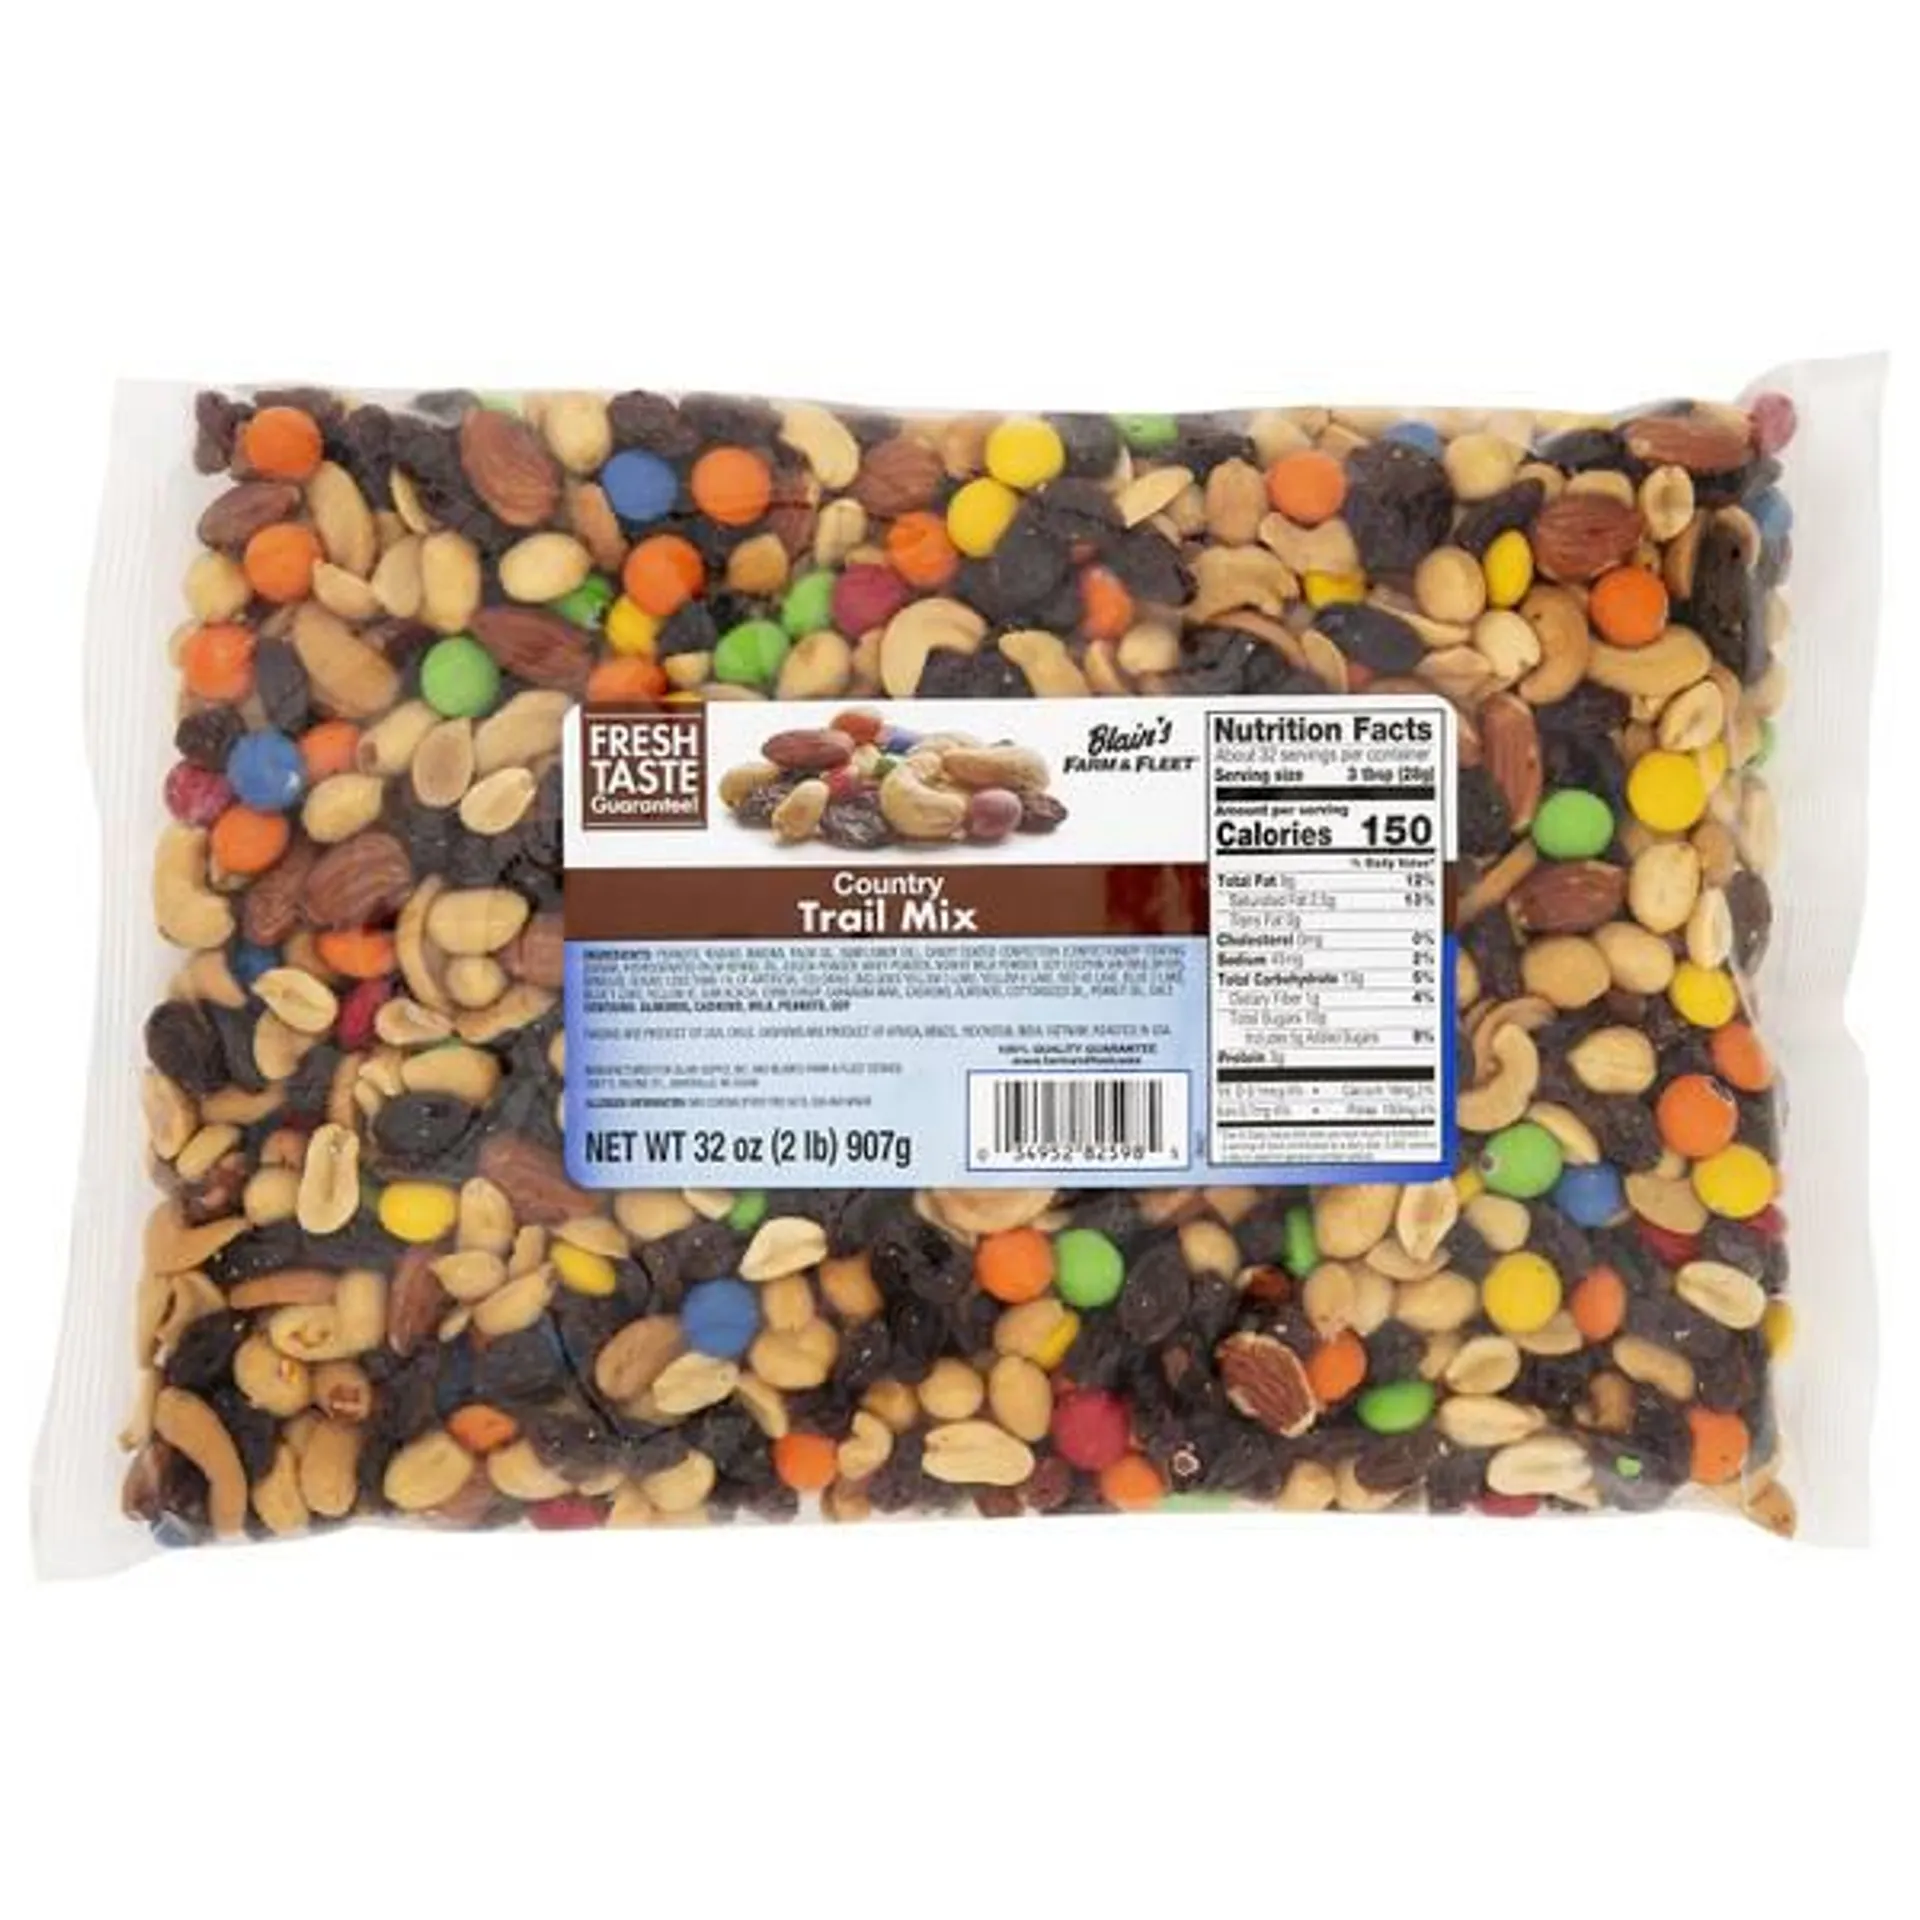 32 oz Country Trail Mix